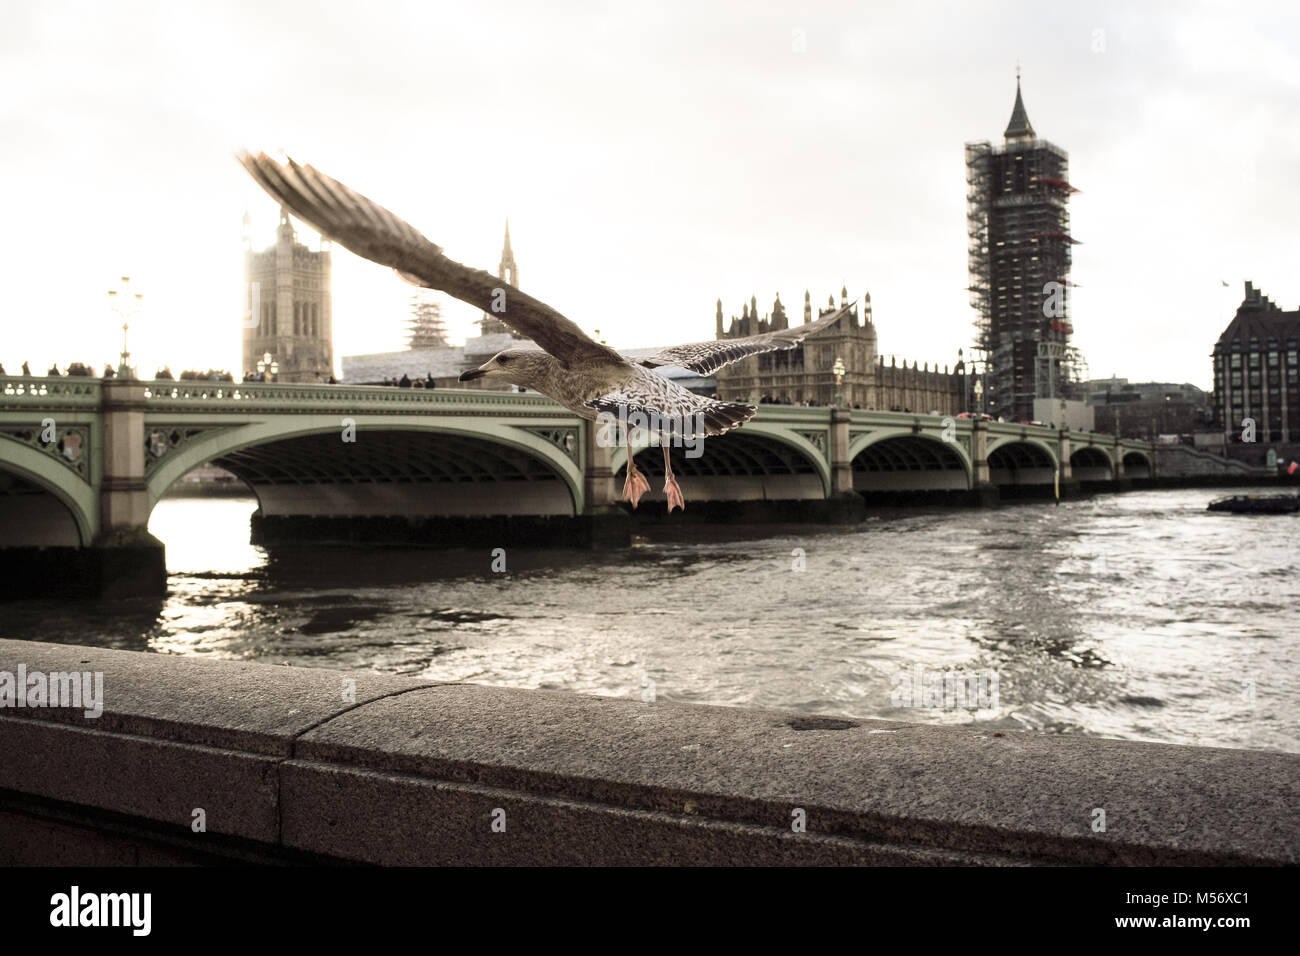 A London Southbank seagull flys towards Westminster bridge &  the Houses of Parliament complete with scaffolding restoration on Elizabeth tower. Stock Photo